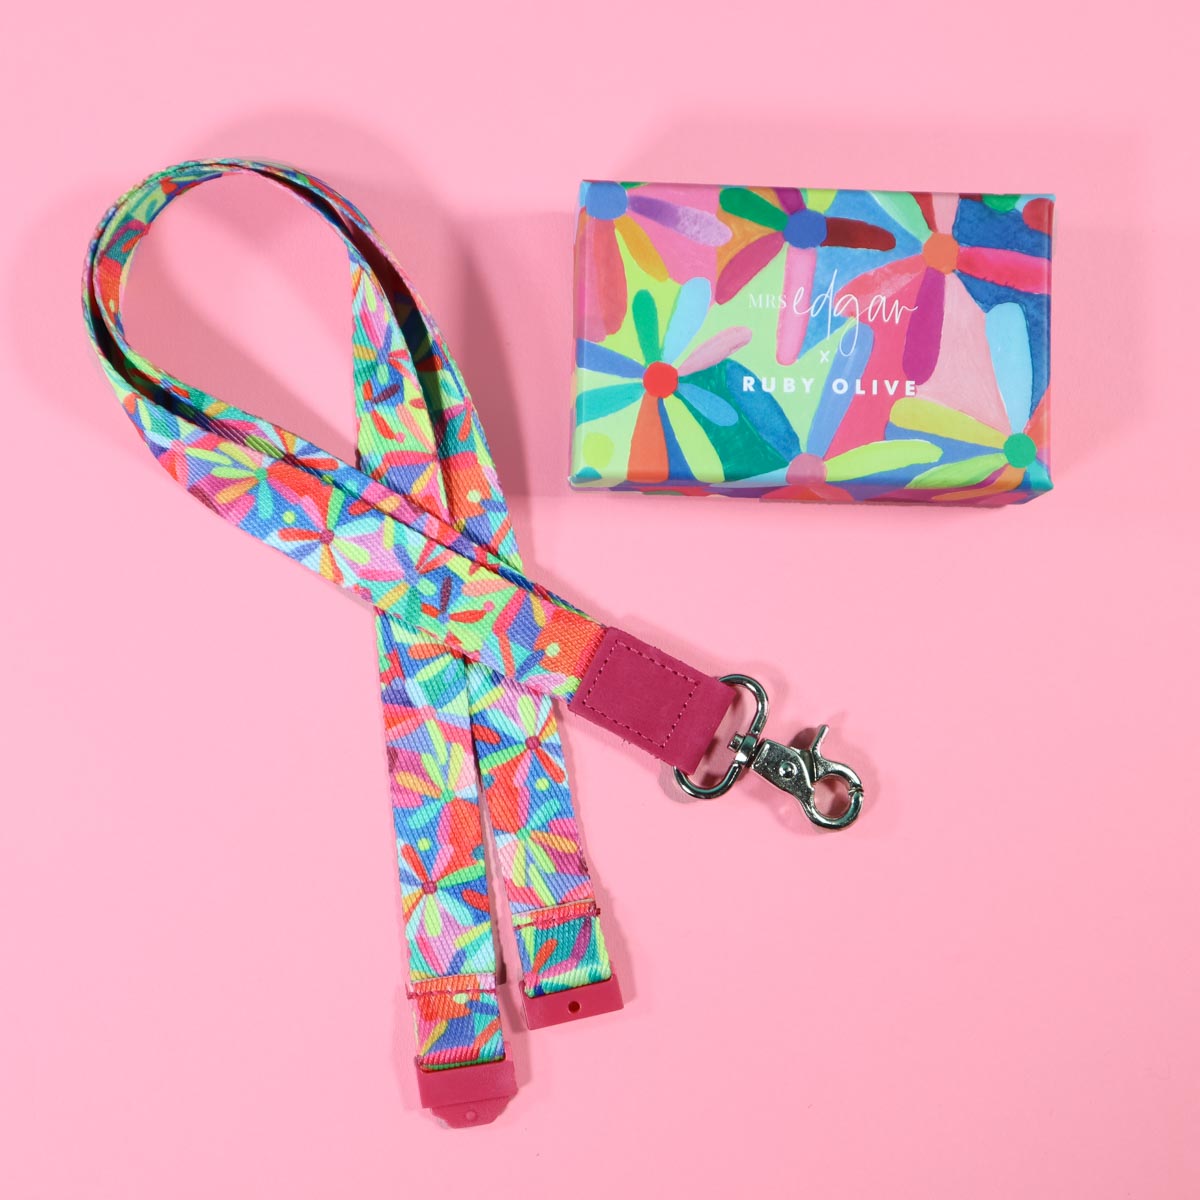 Colourful daisy patterned teachers lanyard with matching box on pink background. 